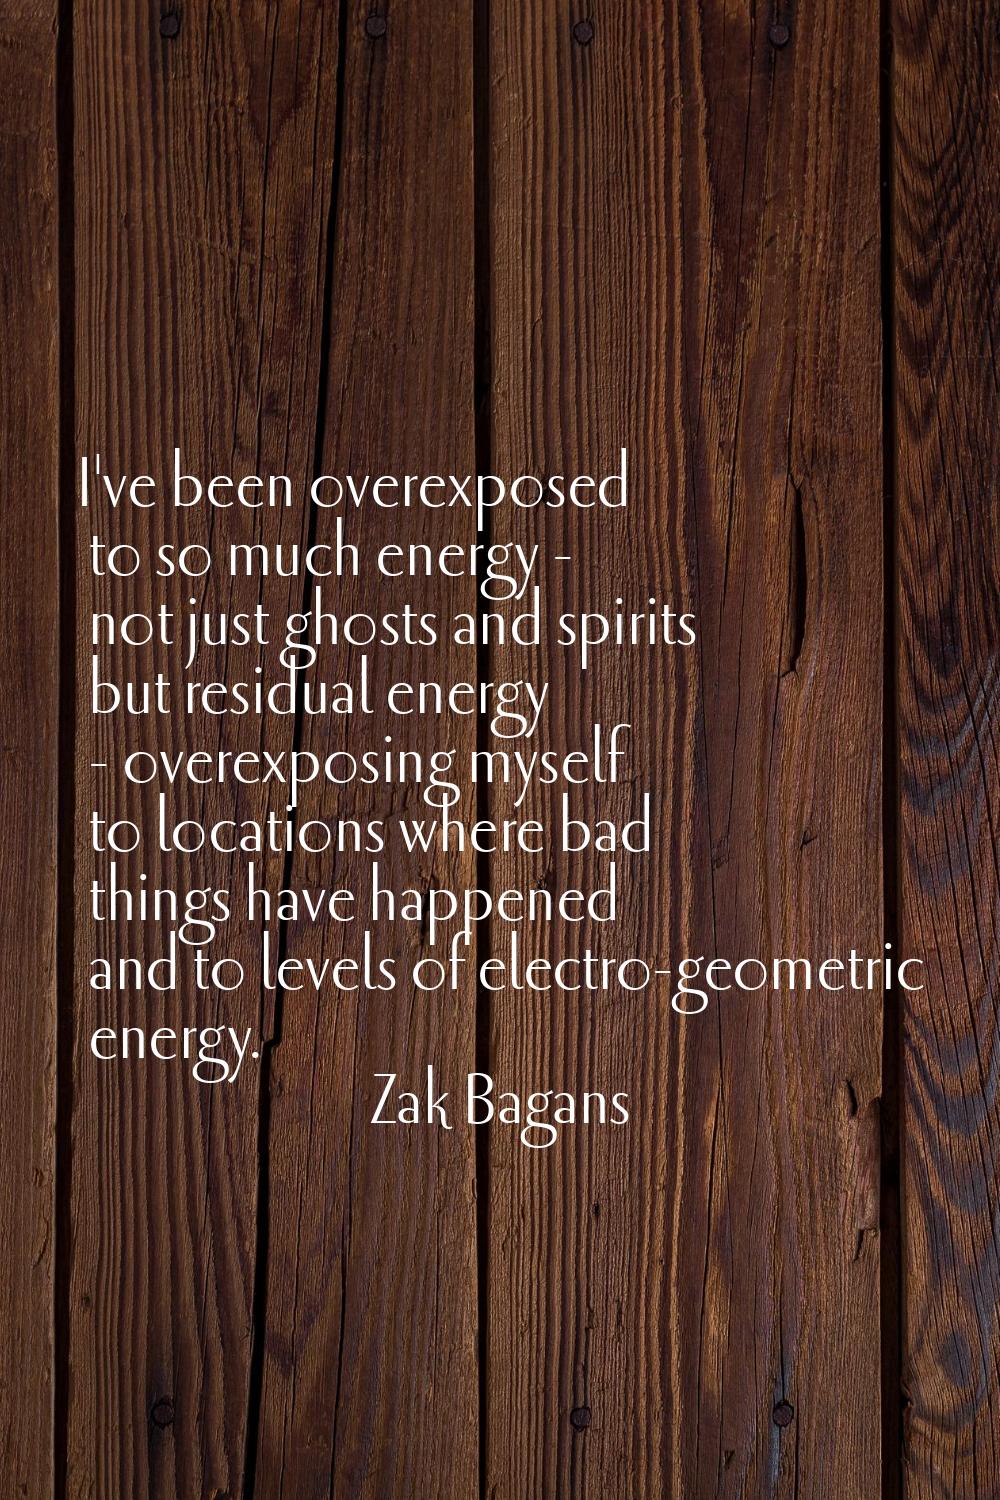 I've been overexposed to so much energy - not just ghosts and spirits but residual energy - overexp